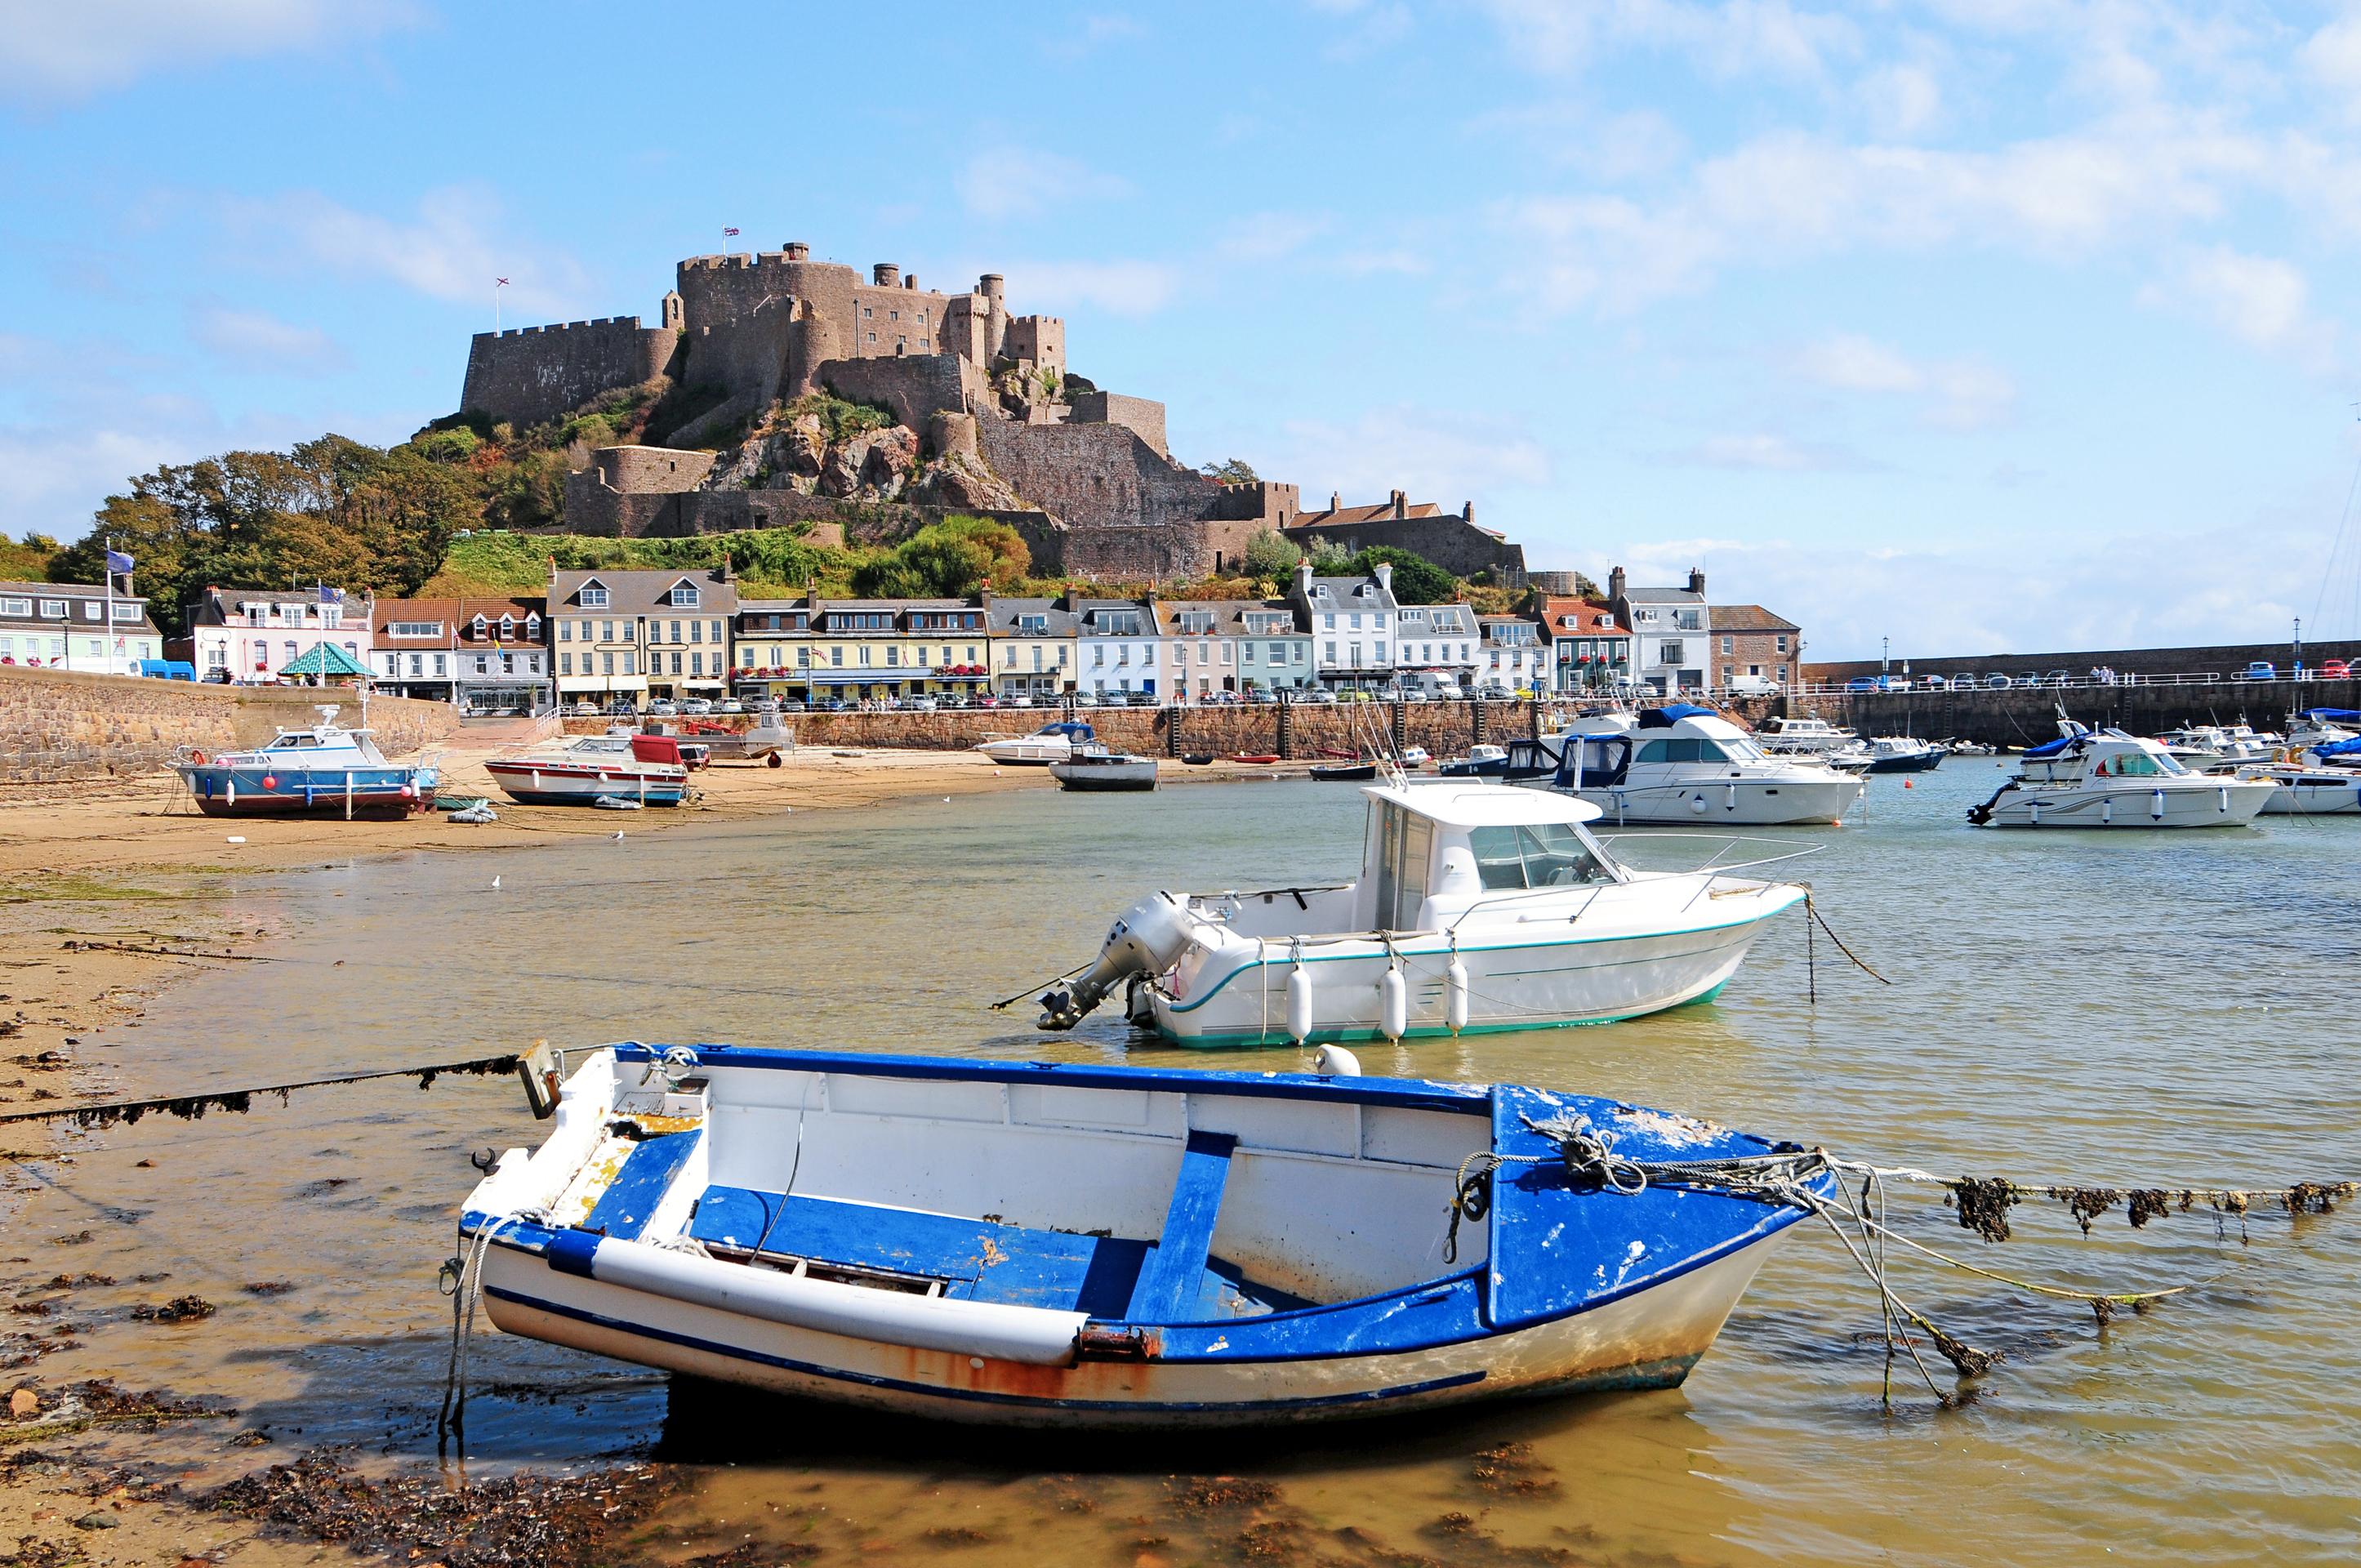 cheap flights to jersey from london